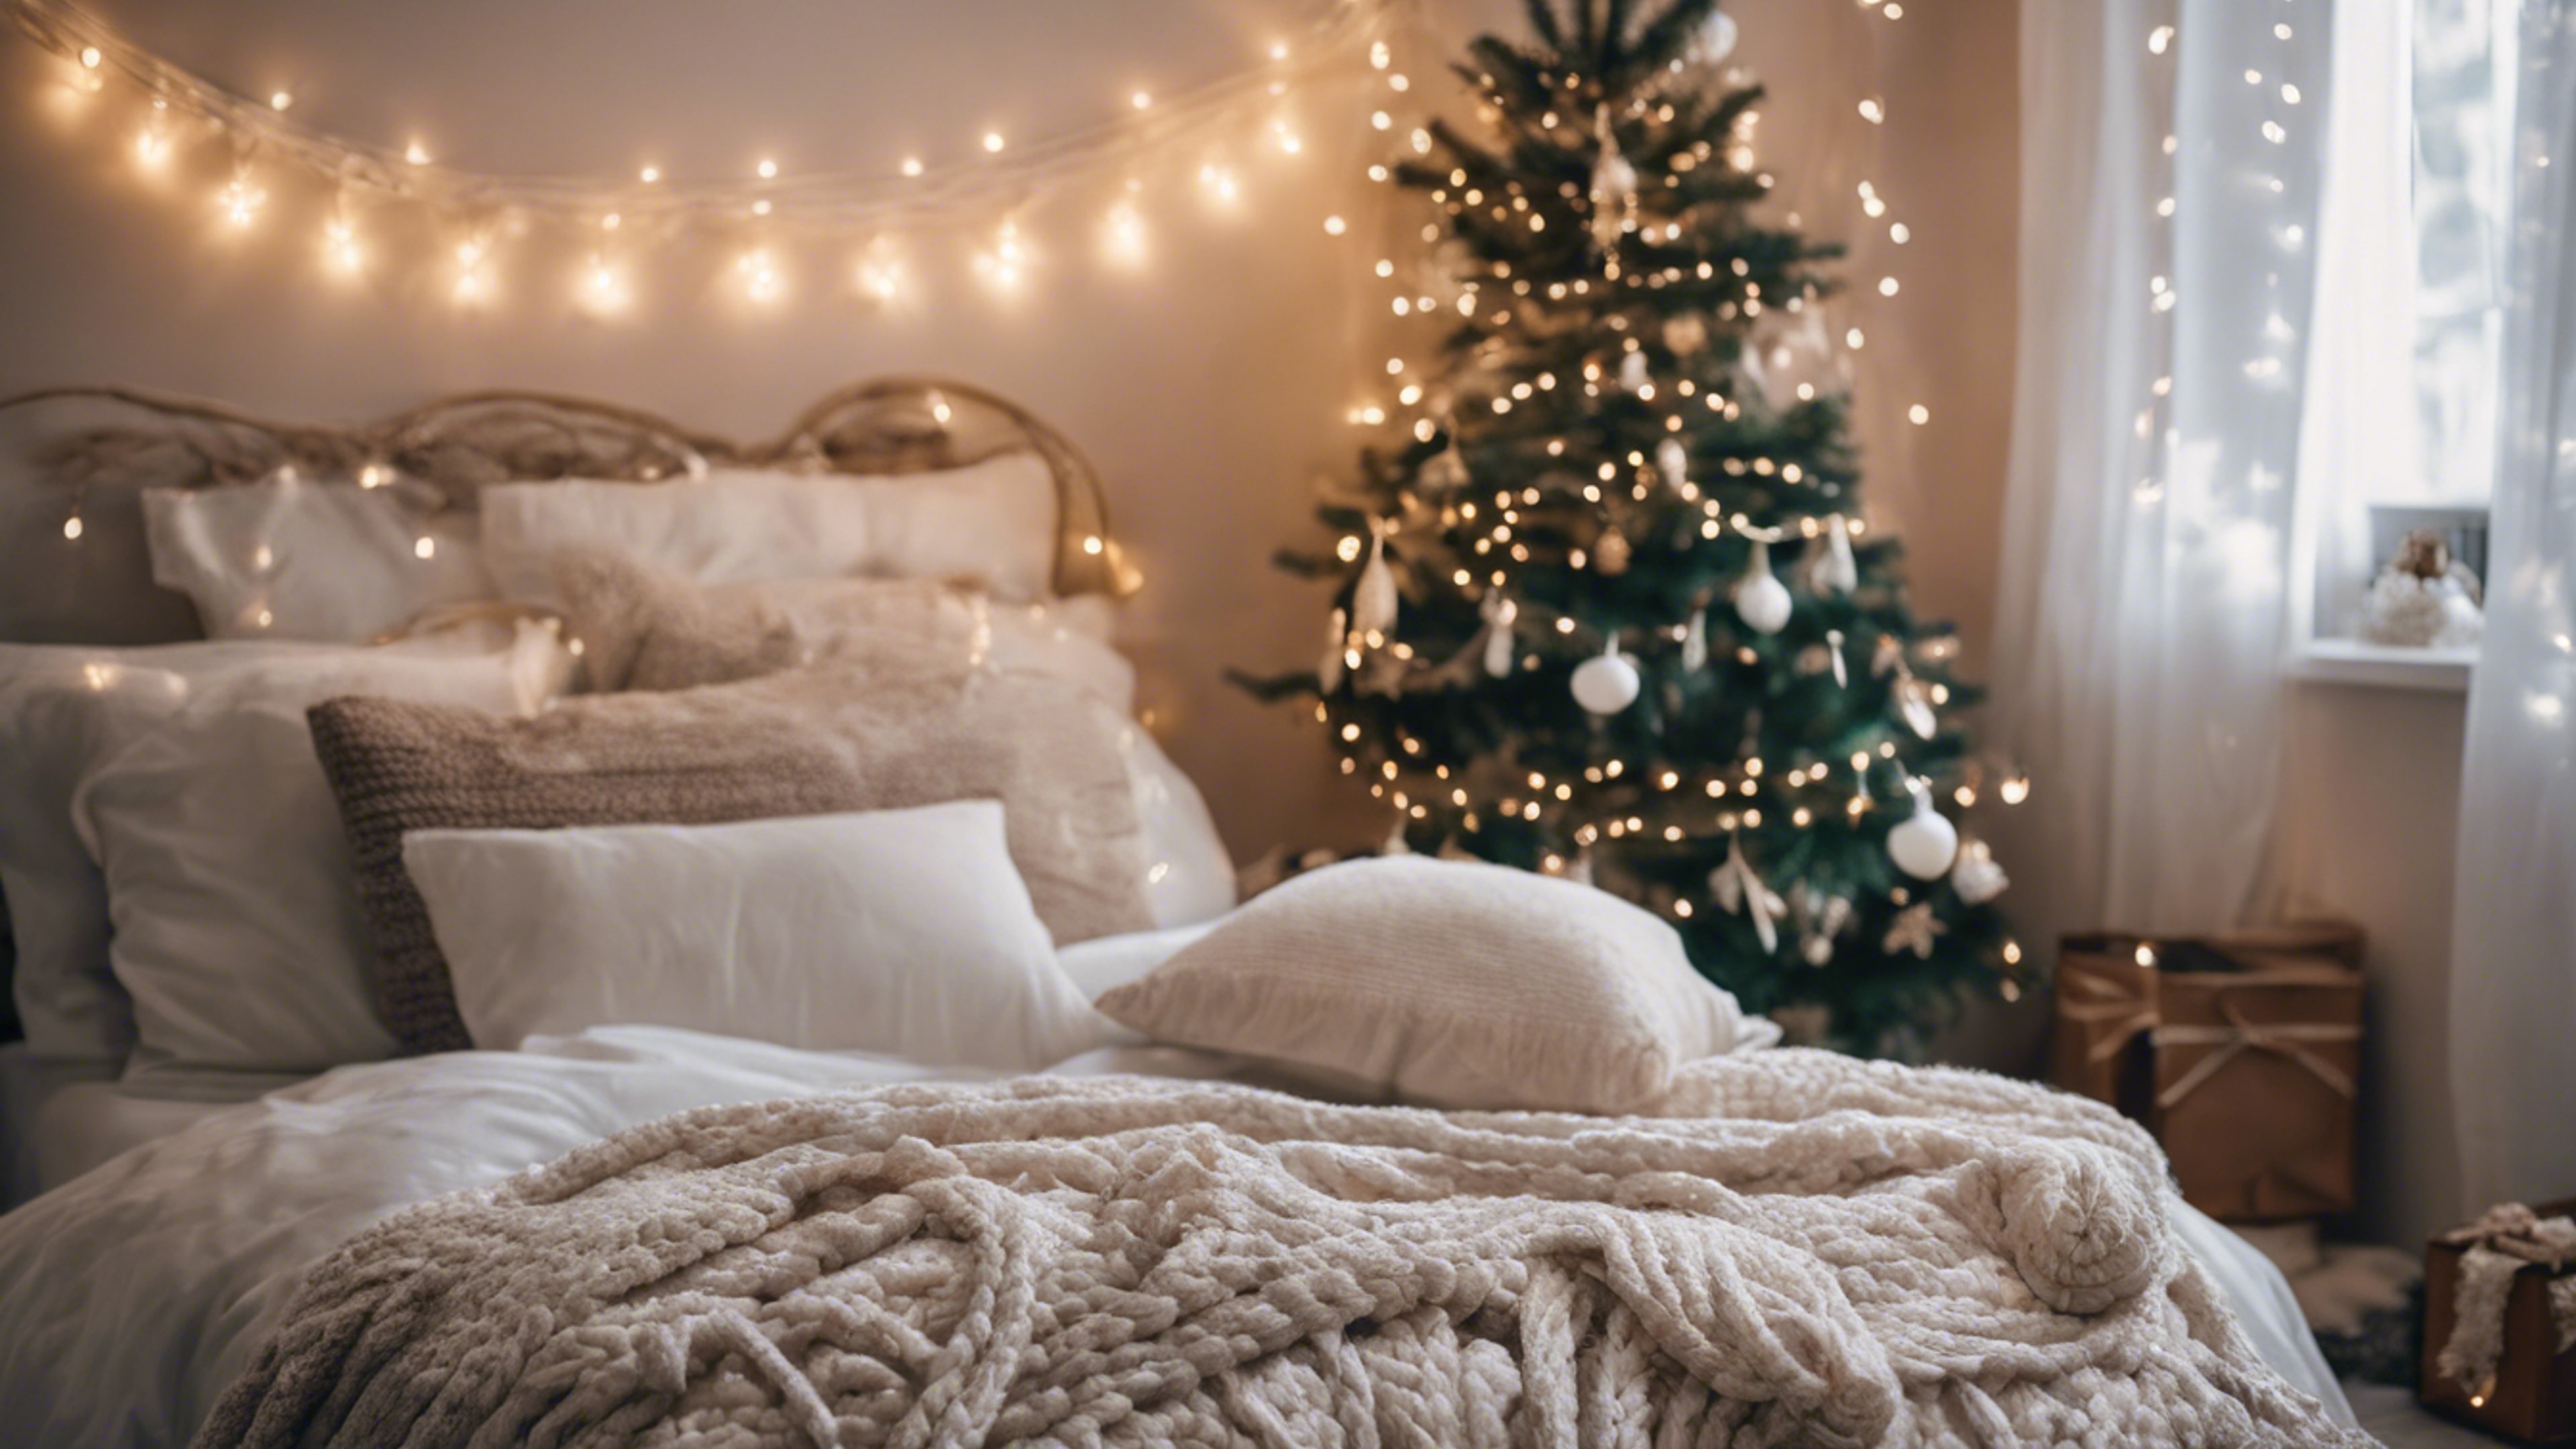 Lovely boho bedroom with a Christmas decor featuring white string lights and mini Christmas tree with crochet ornaments. Wallpaper[9a036ae71a1a486db997]